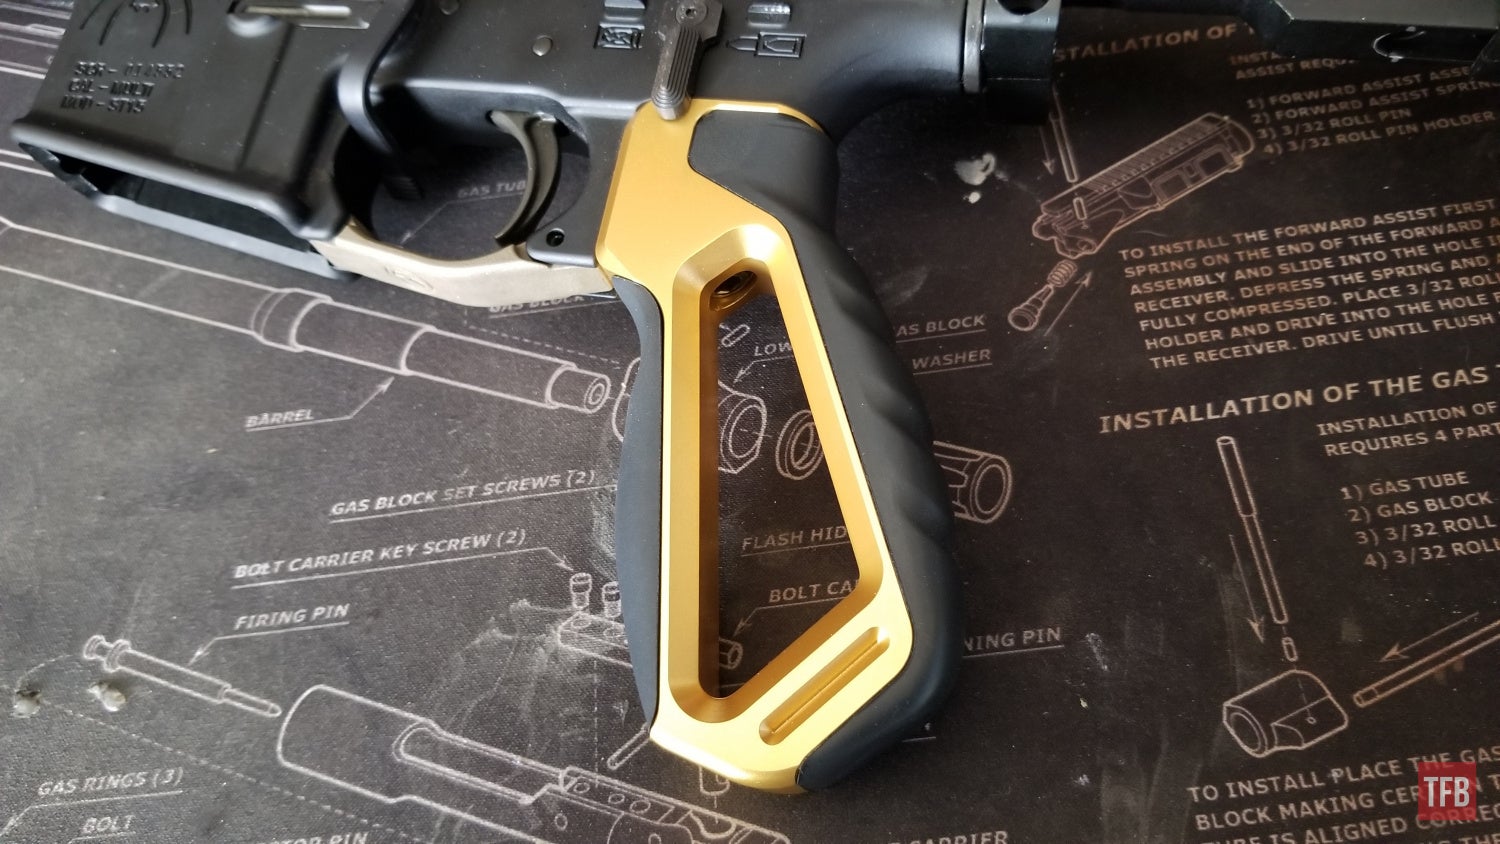 REVIEW: Tyrant Designs Concept One and MOD v2 Grip Upgrades